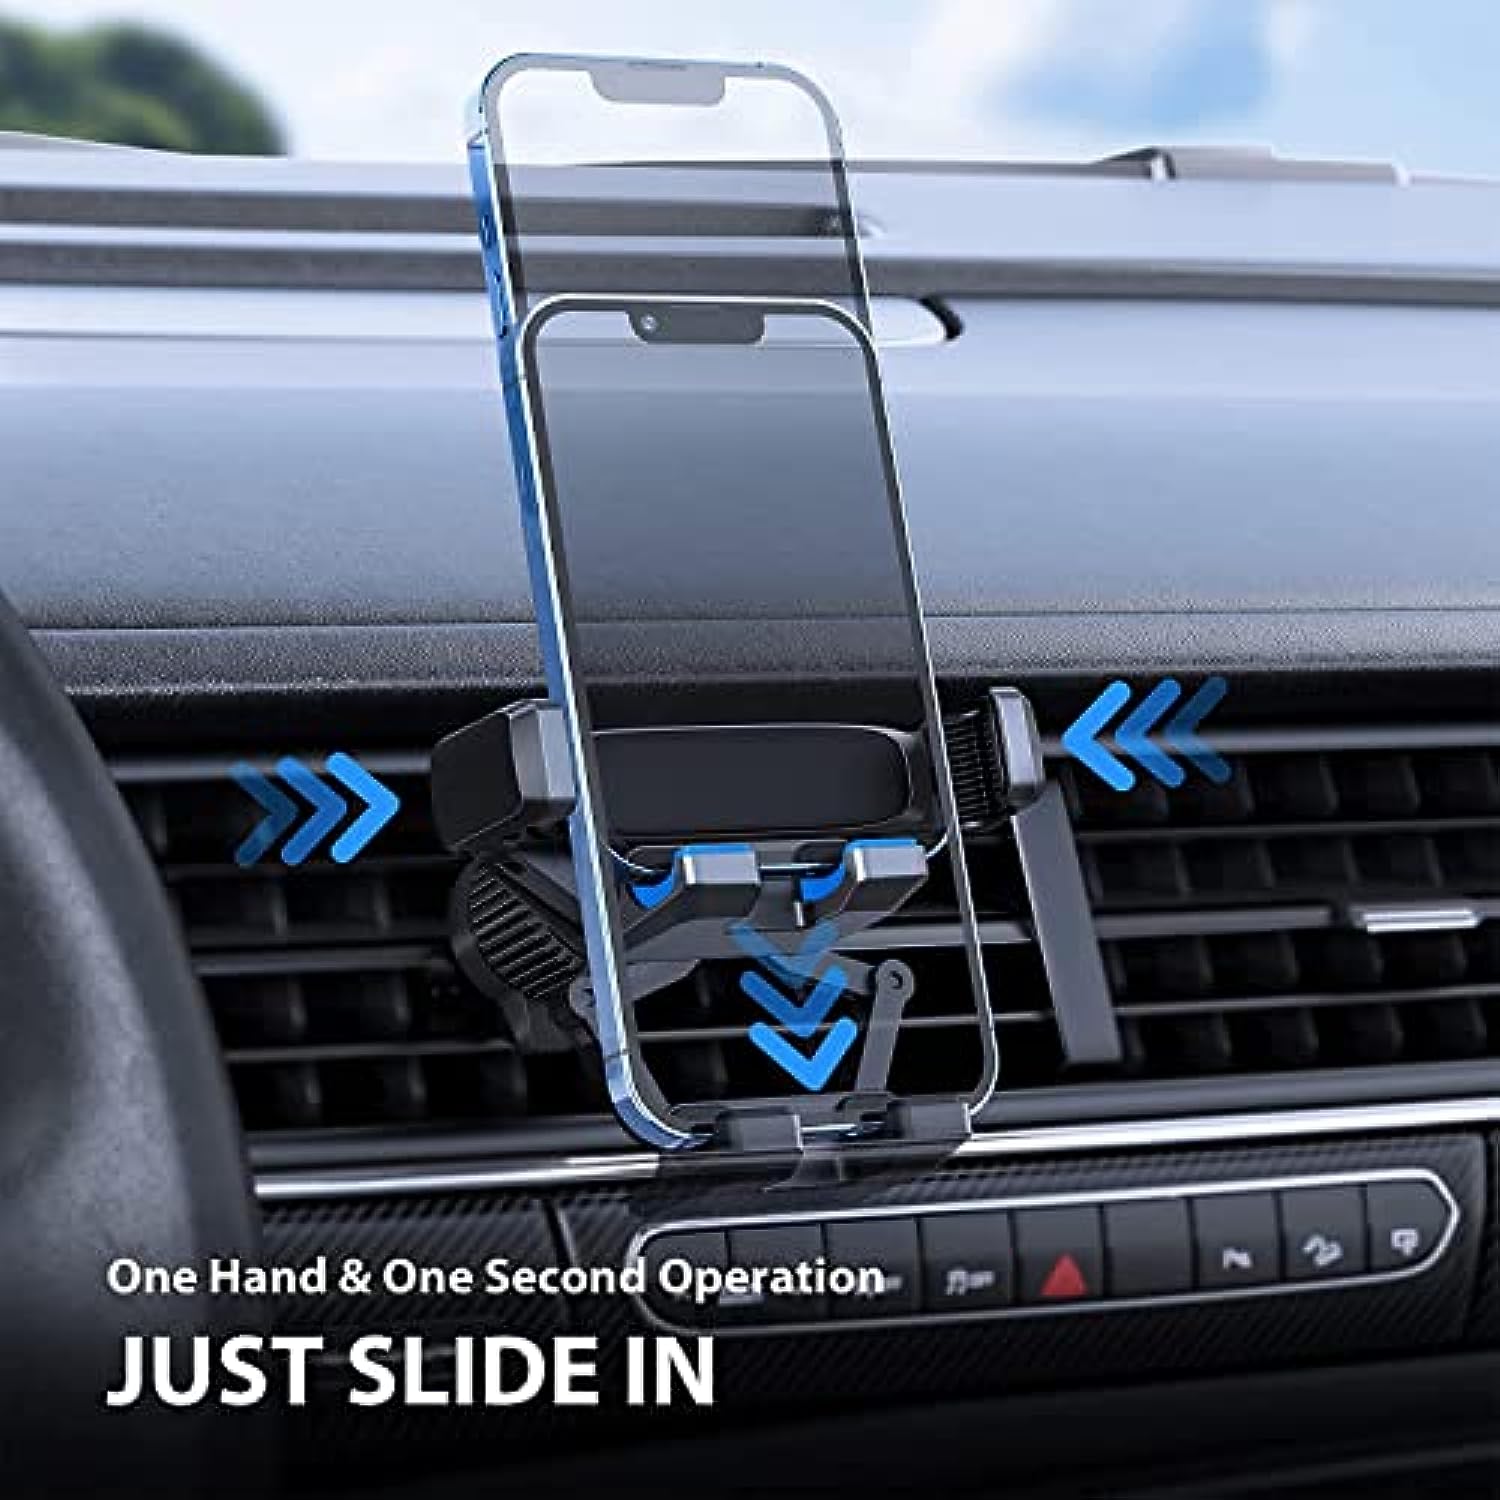 Air Vent Clip Auto Lock Car Cell Phone Holder Mount Cradle in Vehicle Fit for Smartphone